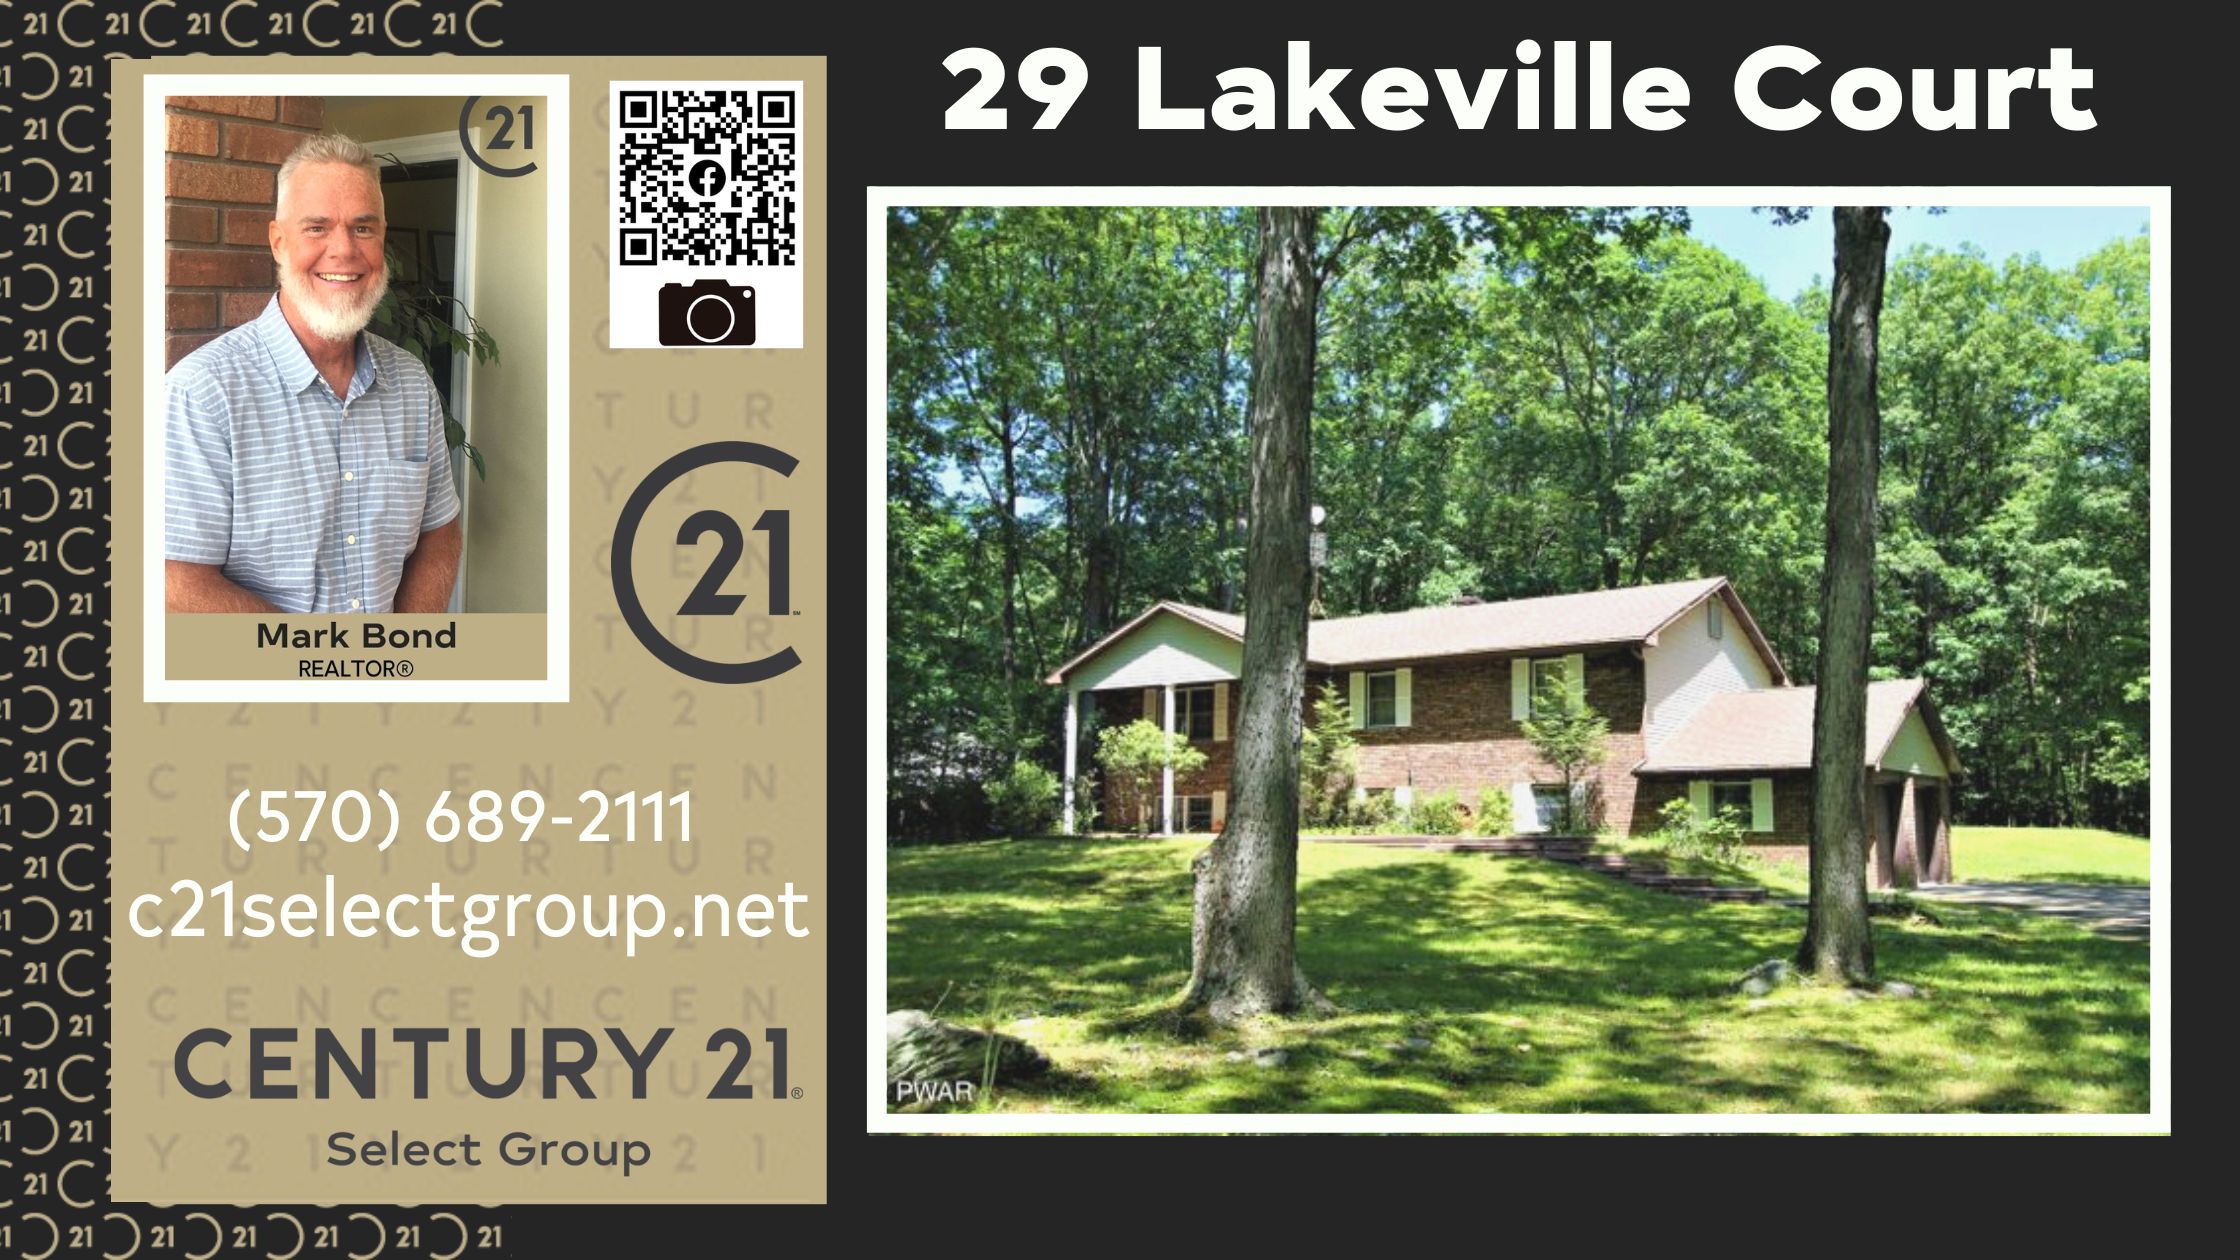 29 Lakeville Court: Bi-Level on Stately Country Cul-de-Sac